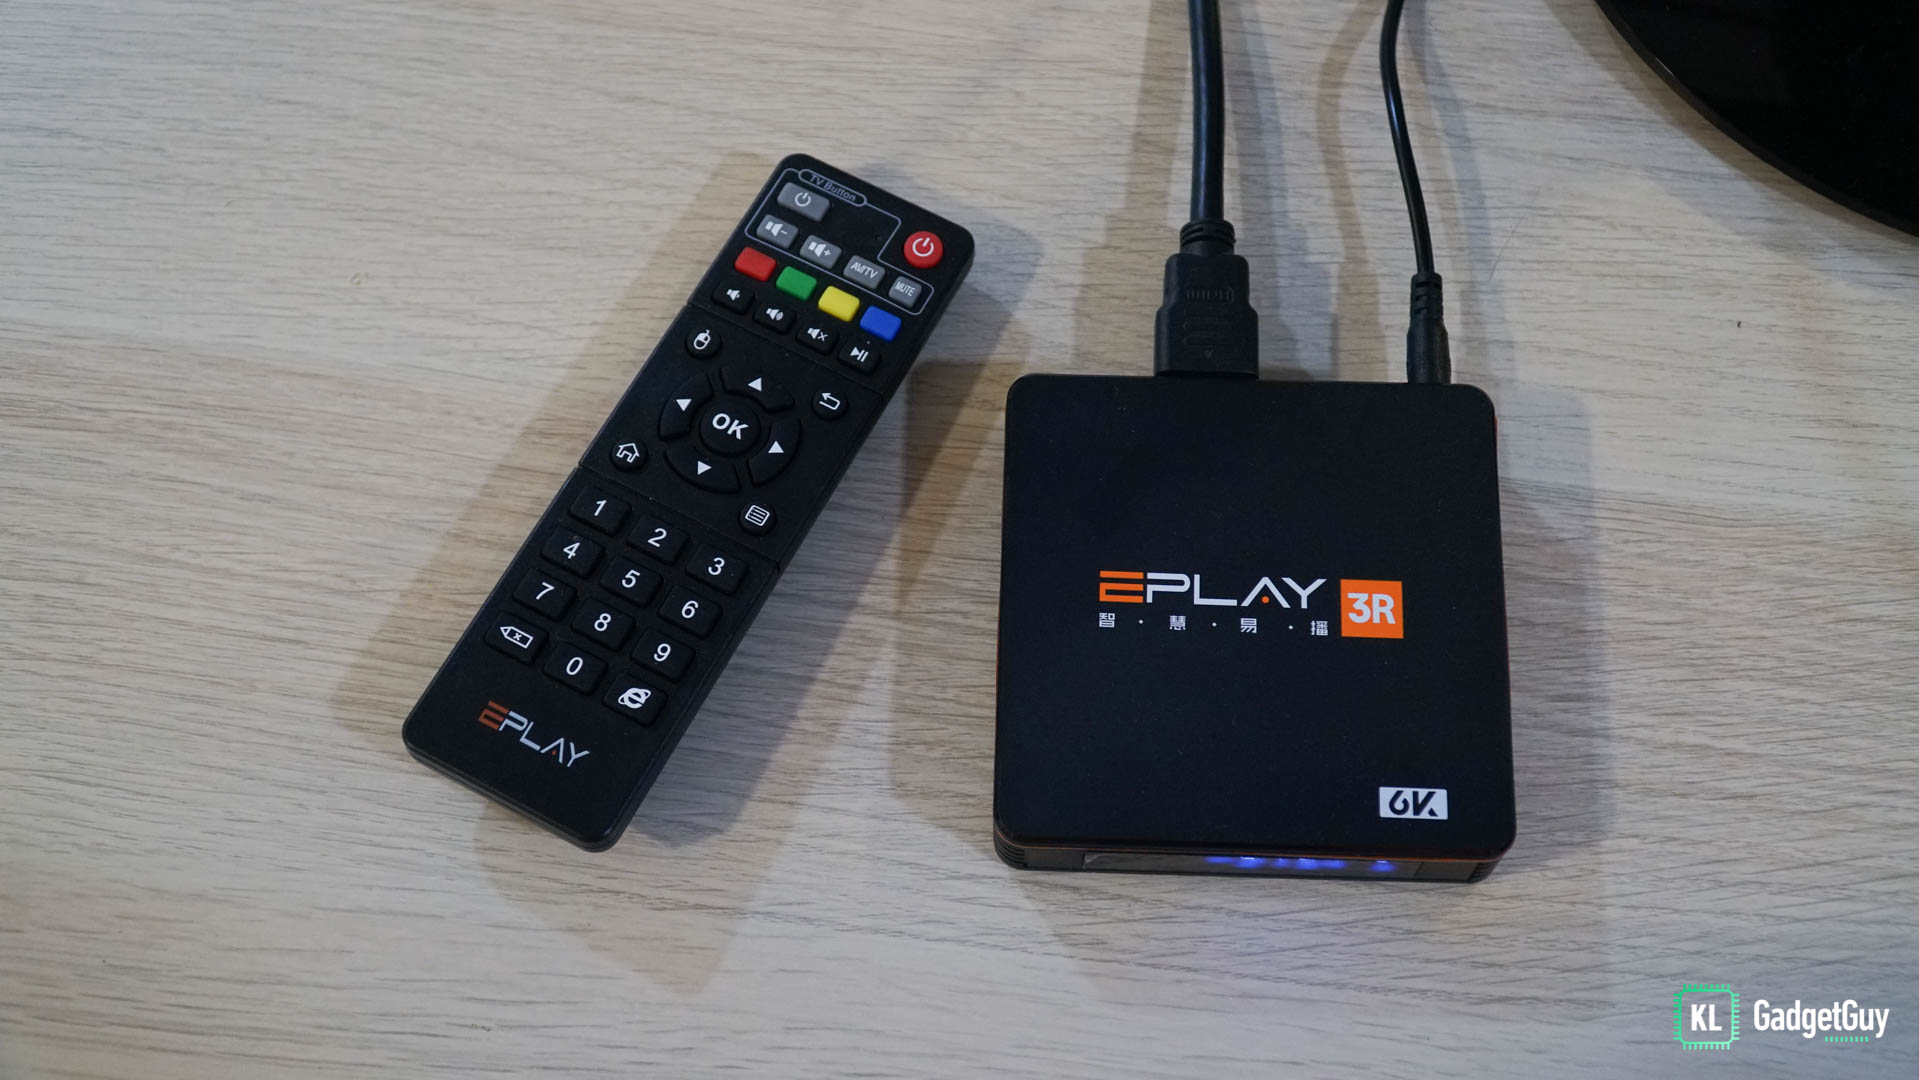 Eplay 3r Review A Reliable Tv Box For Your Living Room Klgadgetguy